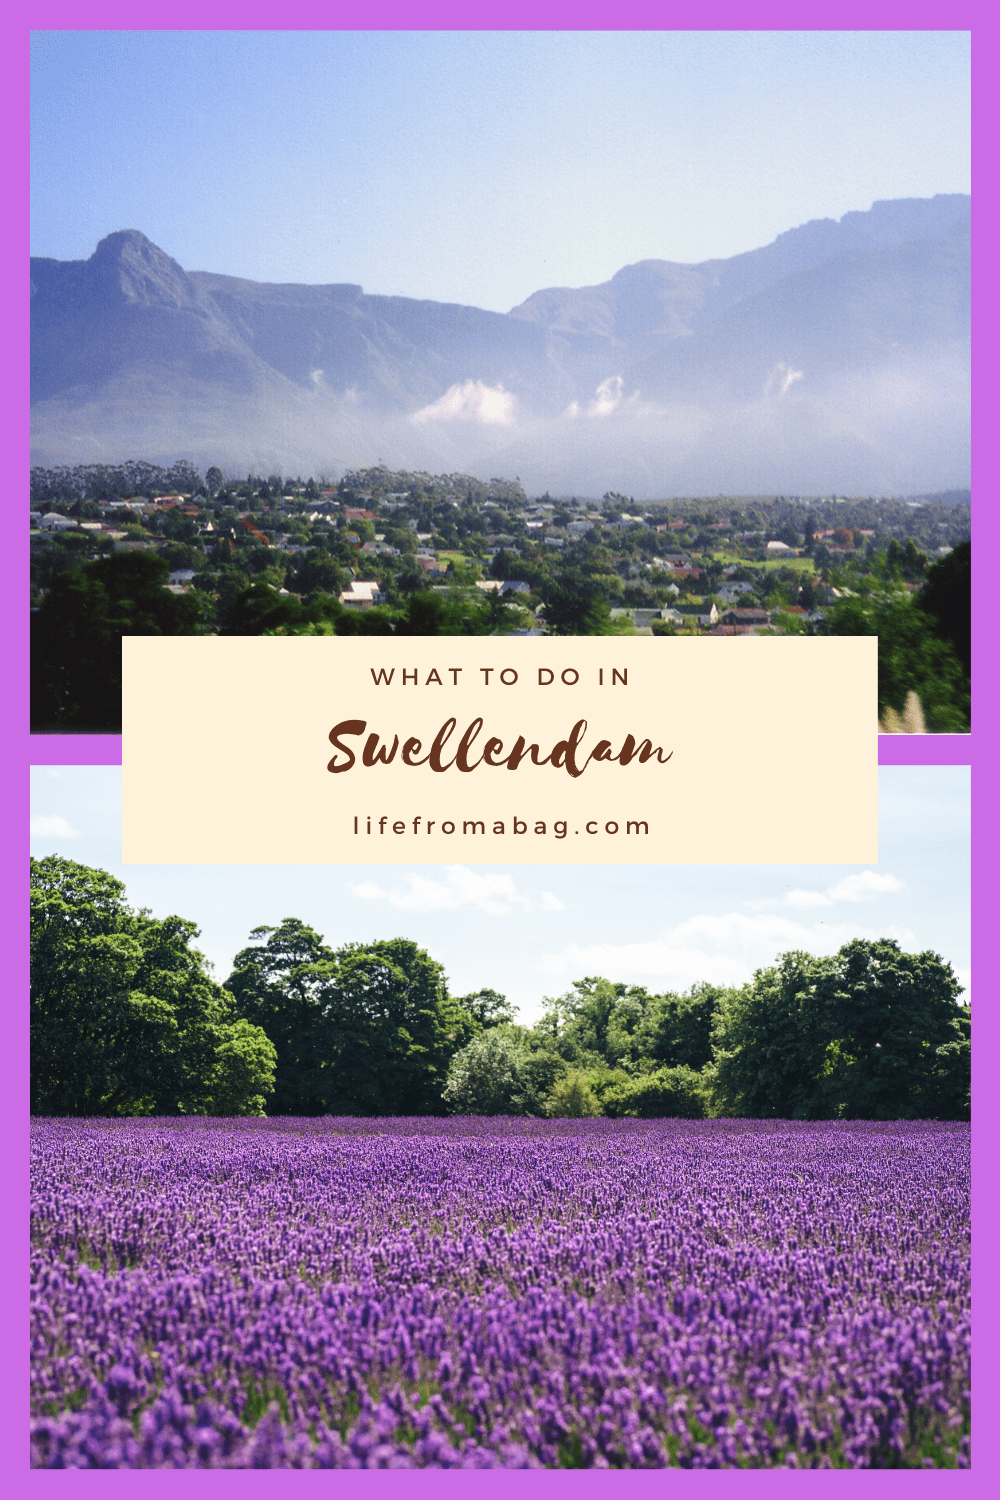 What to do in Swellendam